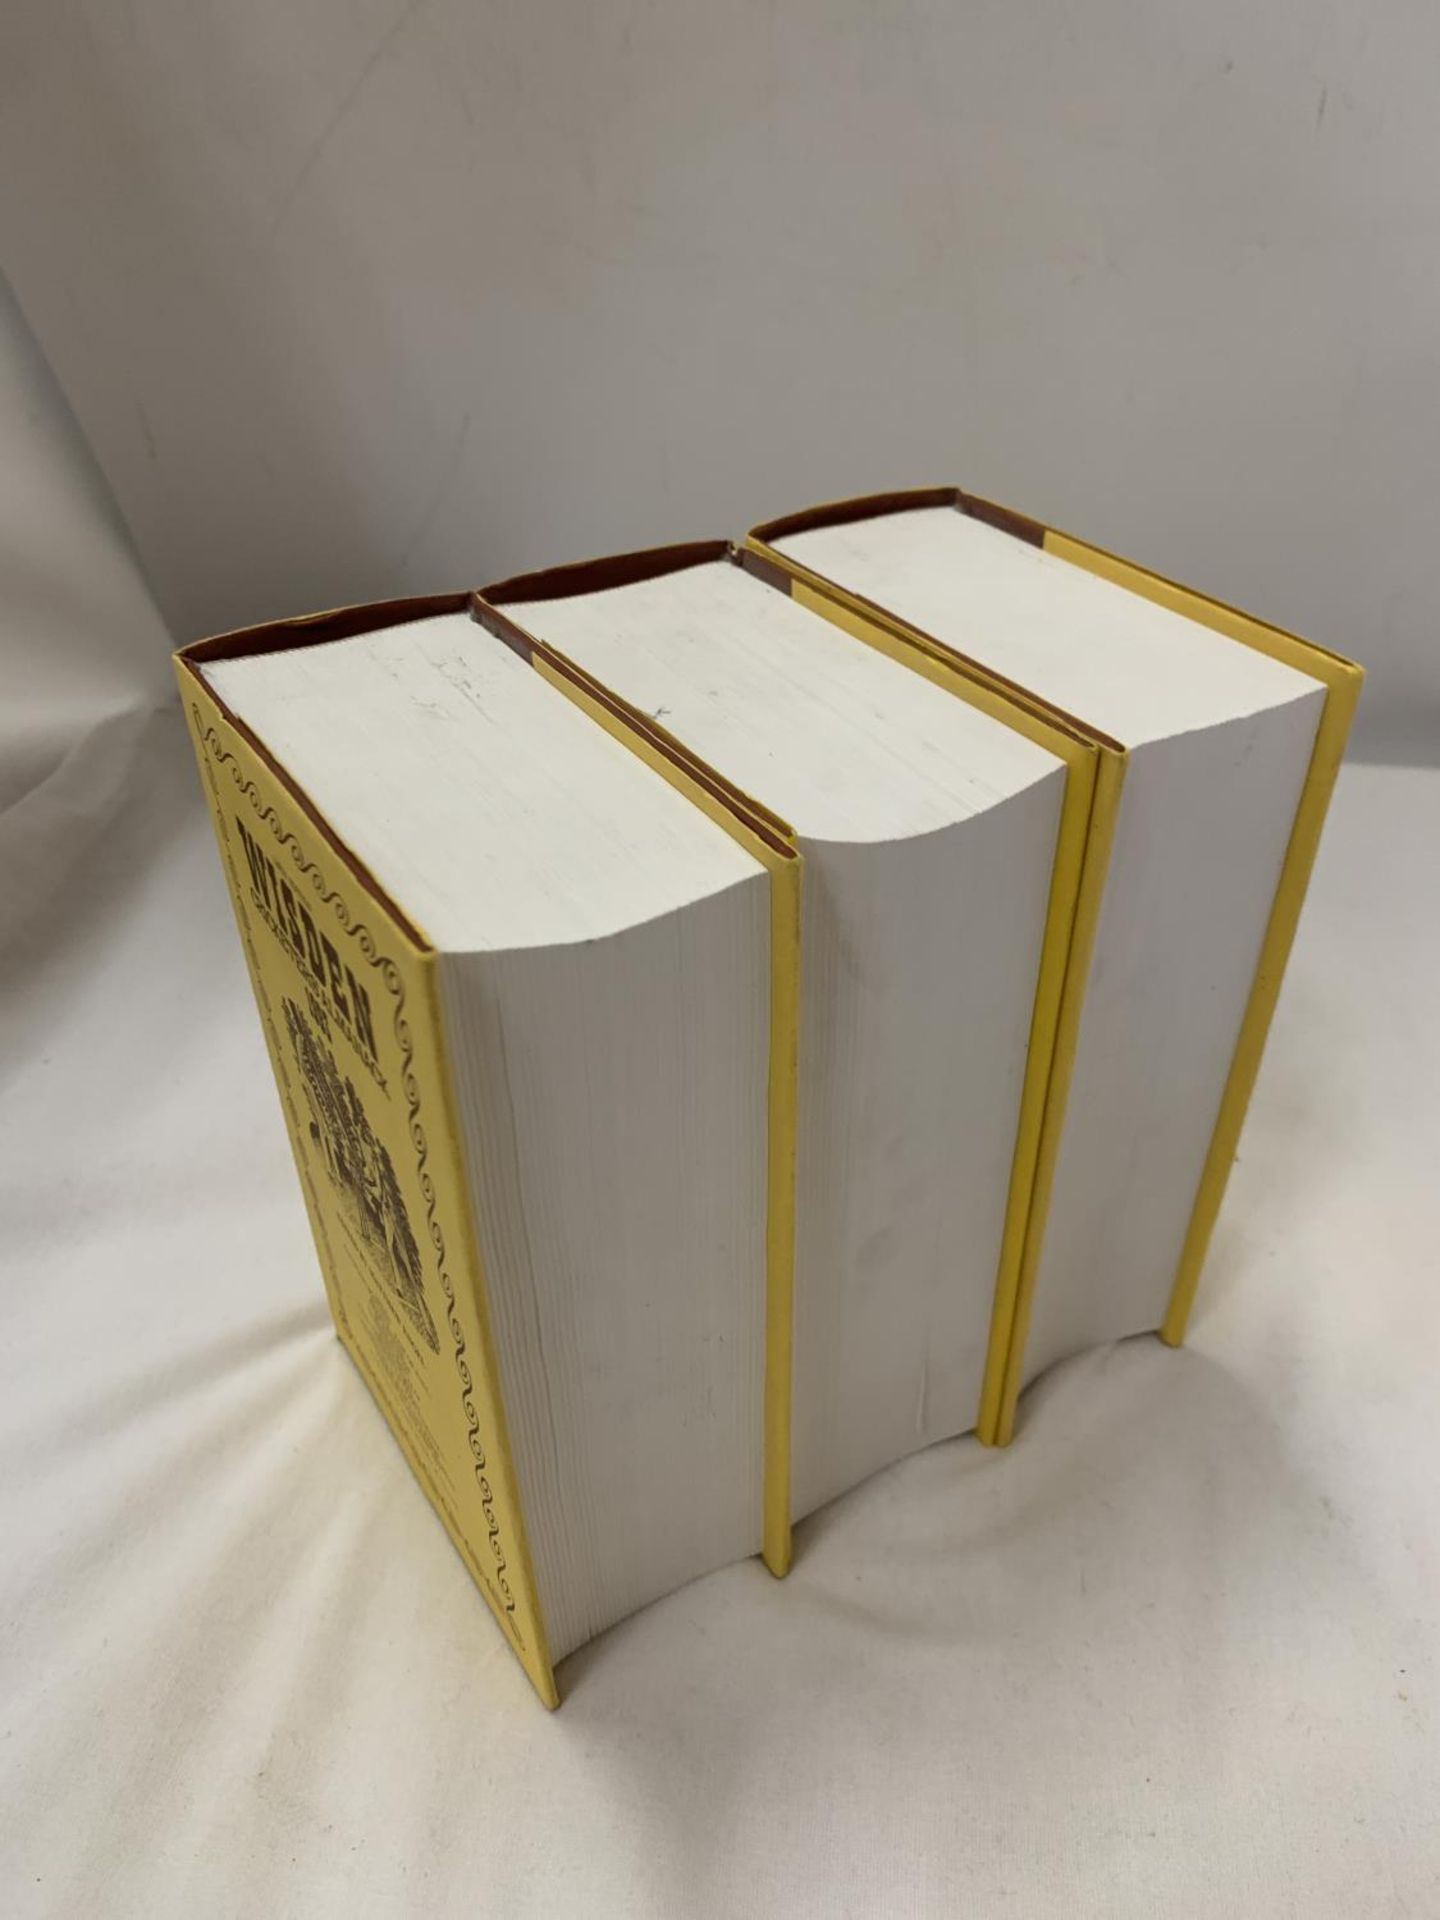 THREE HARDBACK COPIES OF WISDEN'S CRICKETER'S ALMANACKS, 1992, 1993 AND 1994. THESE COPIES ARE IN - Image 5 of 5